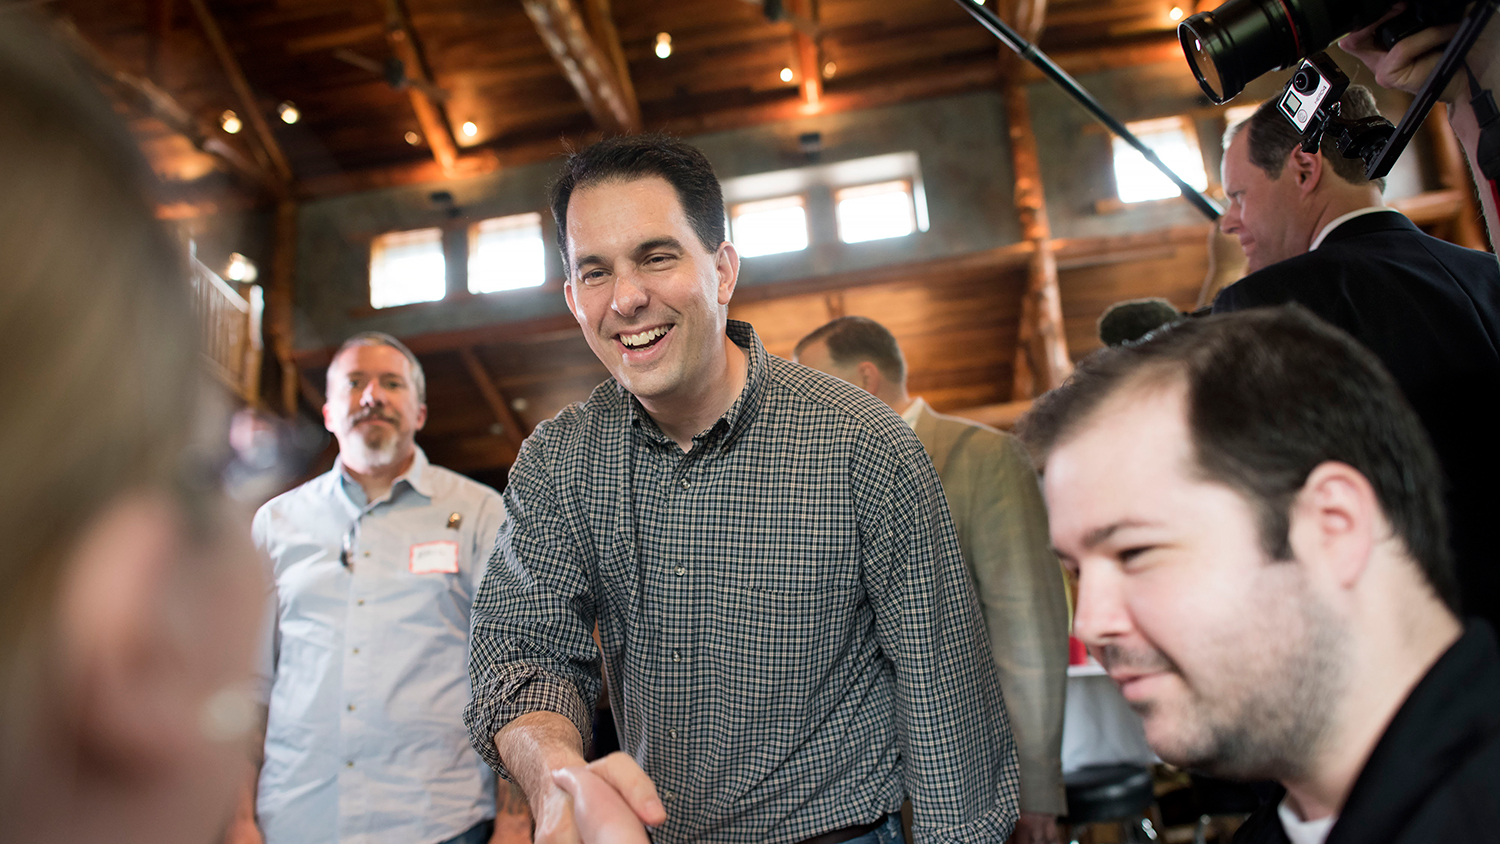 Scott Walker, governor of Wisconsin, greets an attendee during the Chad Airhart Blue Jean Bash fundraiser in West Des Moines, Iowa, U.S., on Saturday, May 16, 2015.
